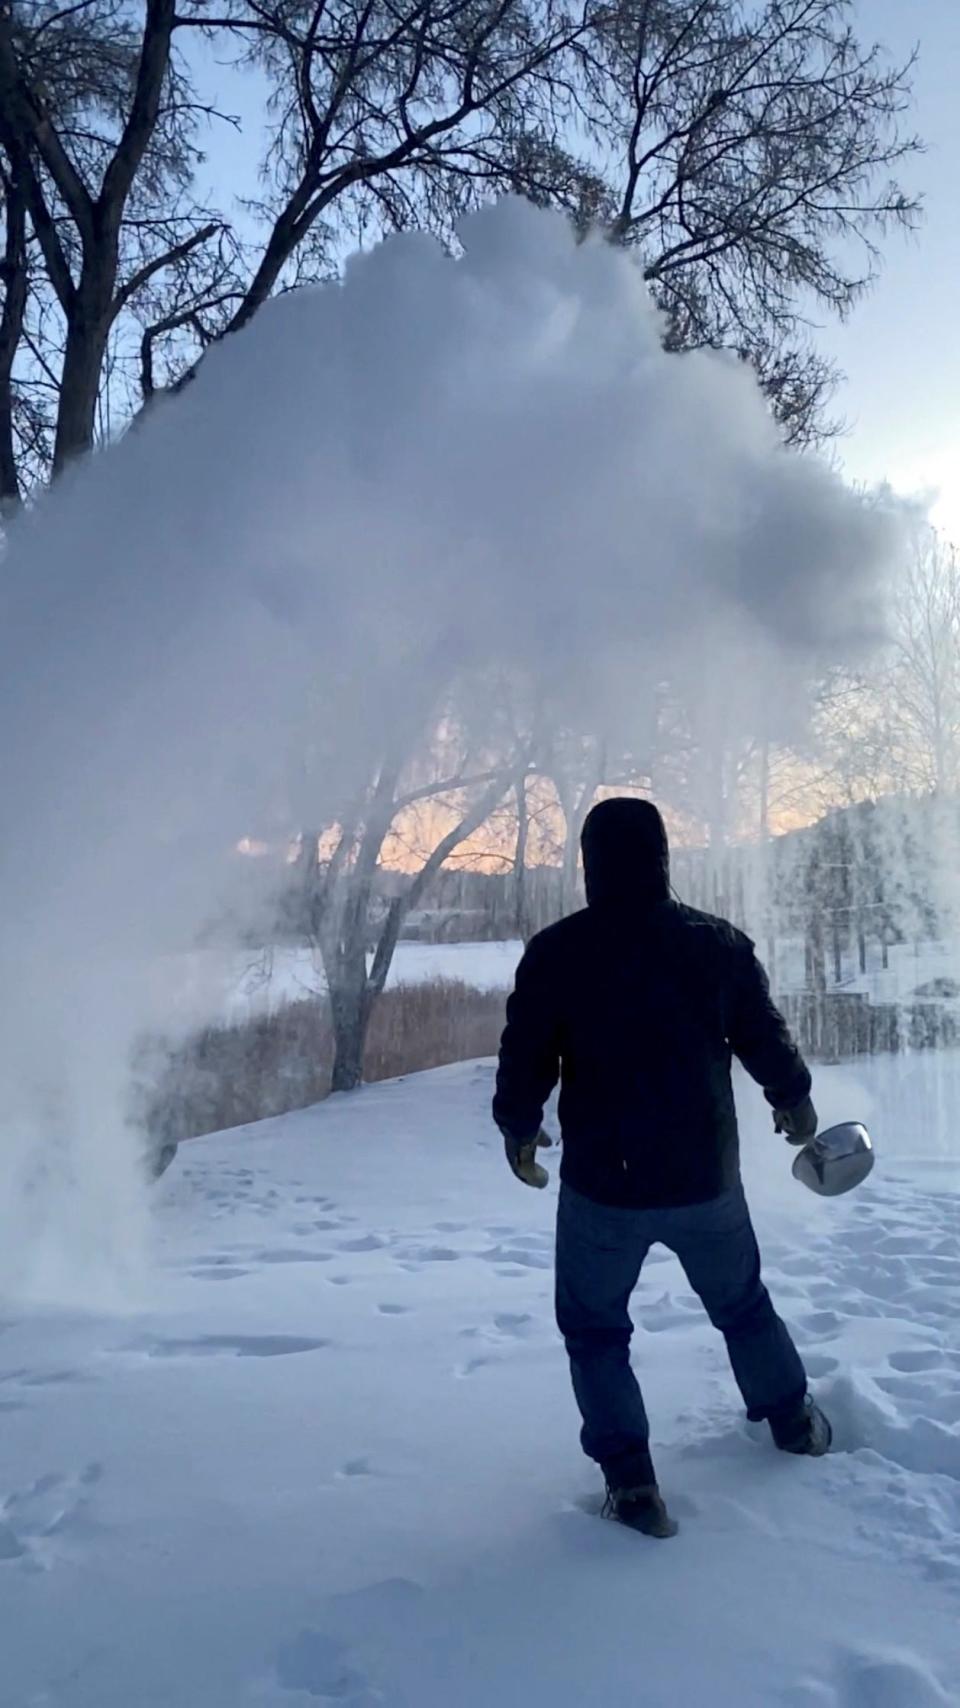 A man tosses hot boiling water in the snow in Carbon County, Montana on December 22 to show how it instantly freezes (@MEMENTOMORI_JMJ via REUTERS)